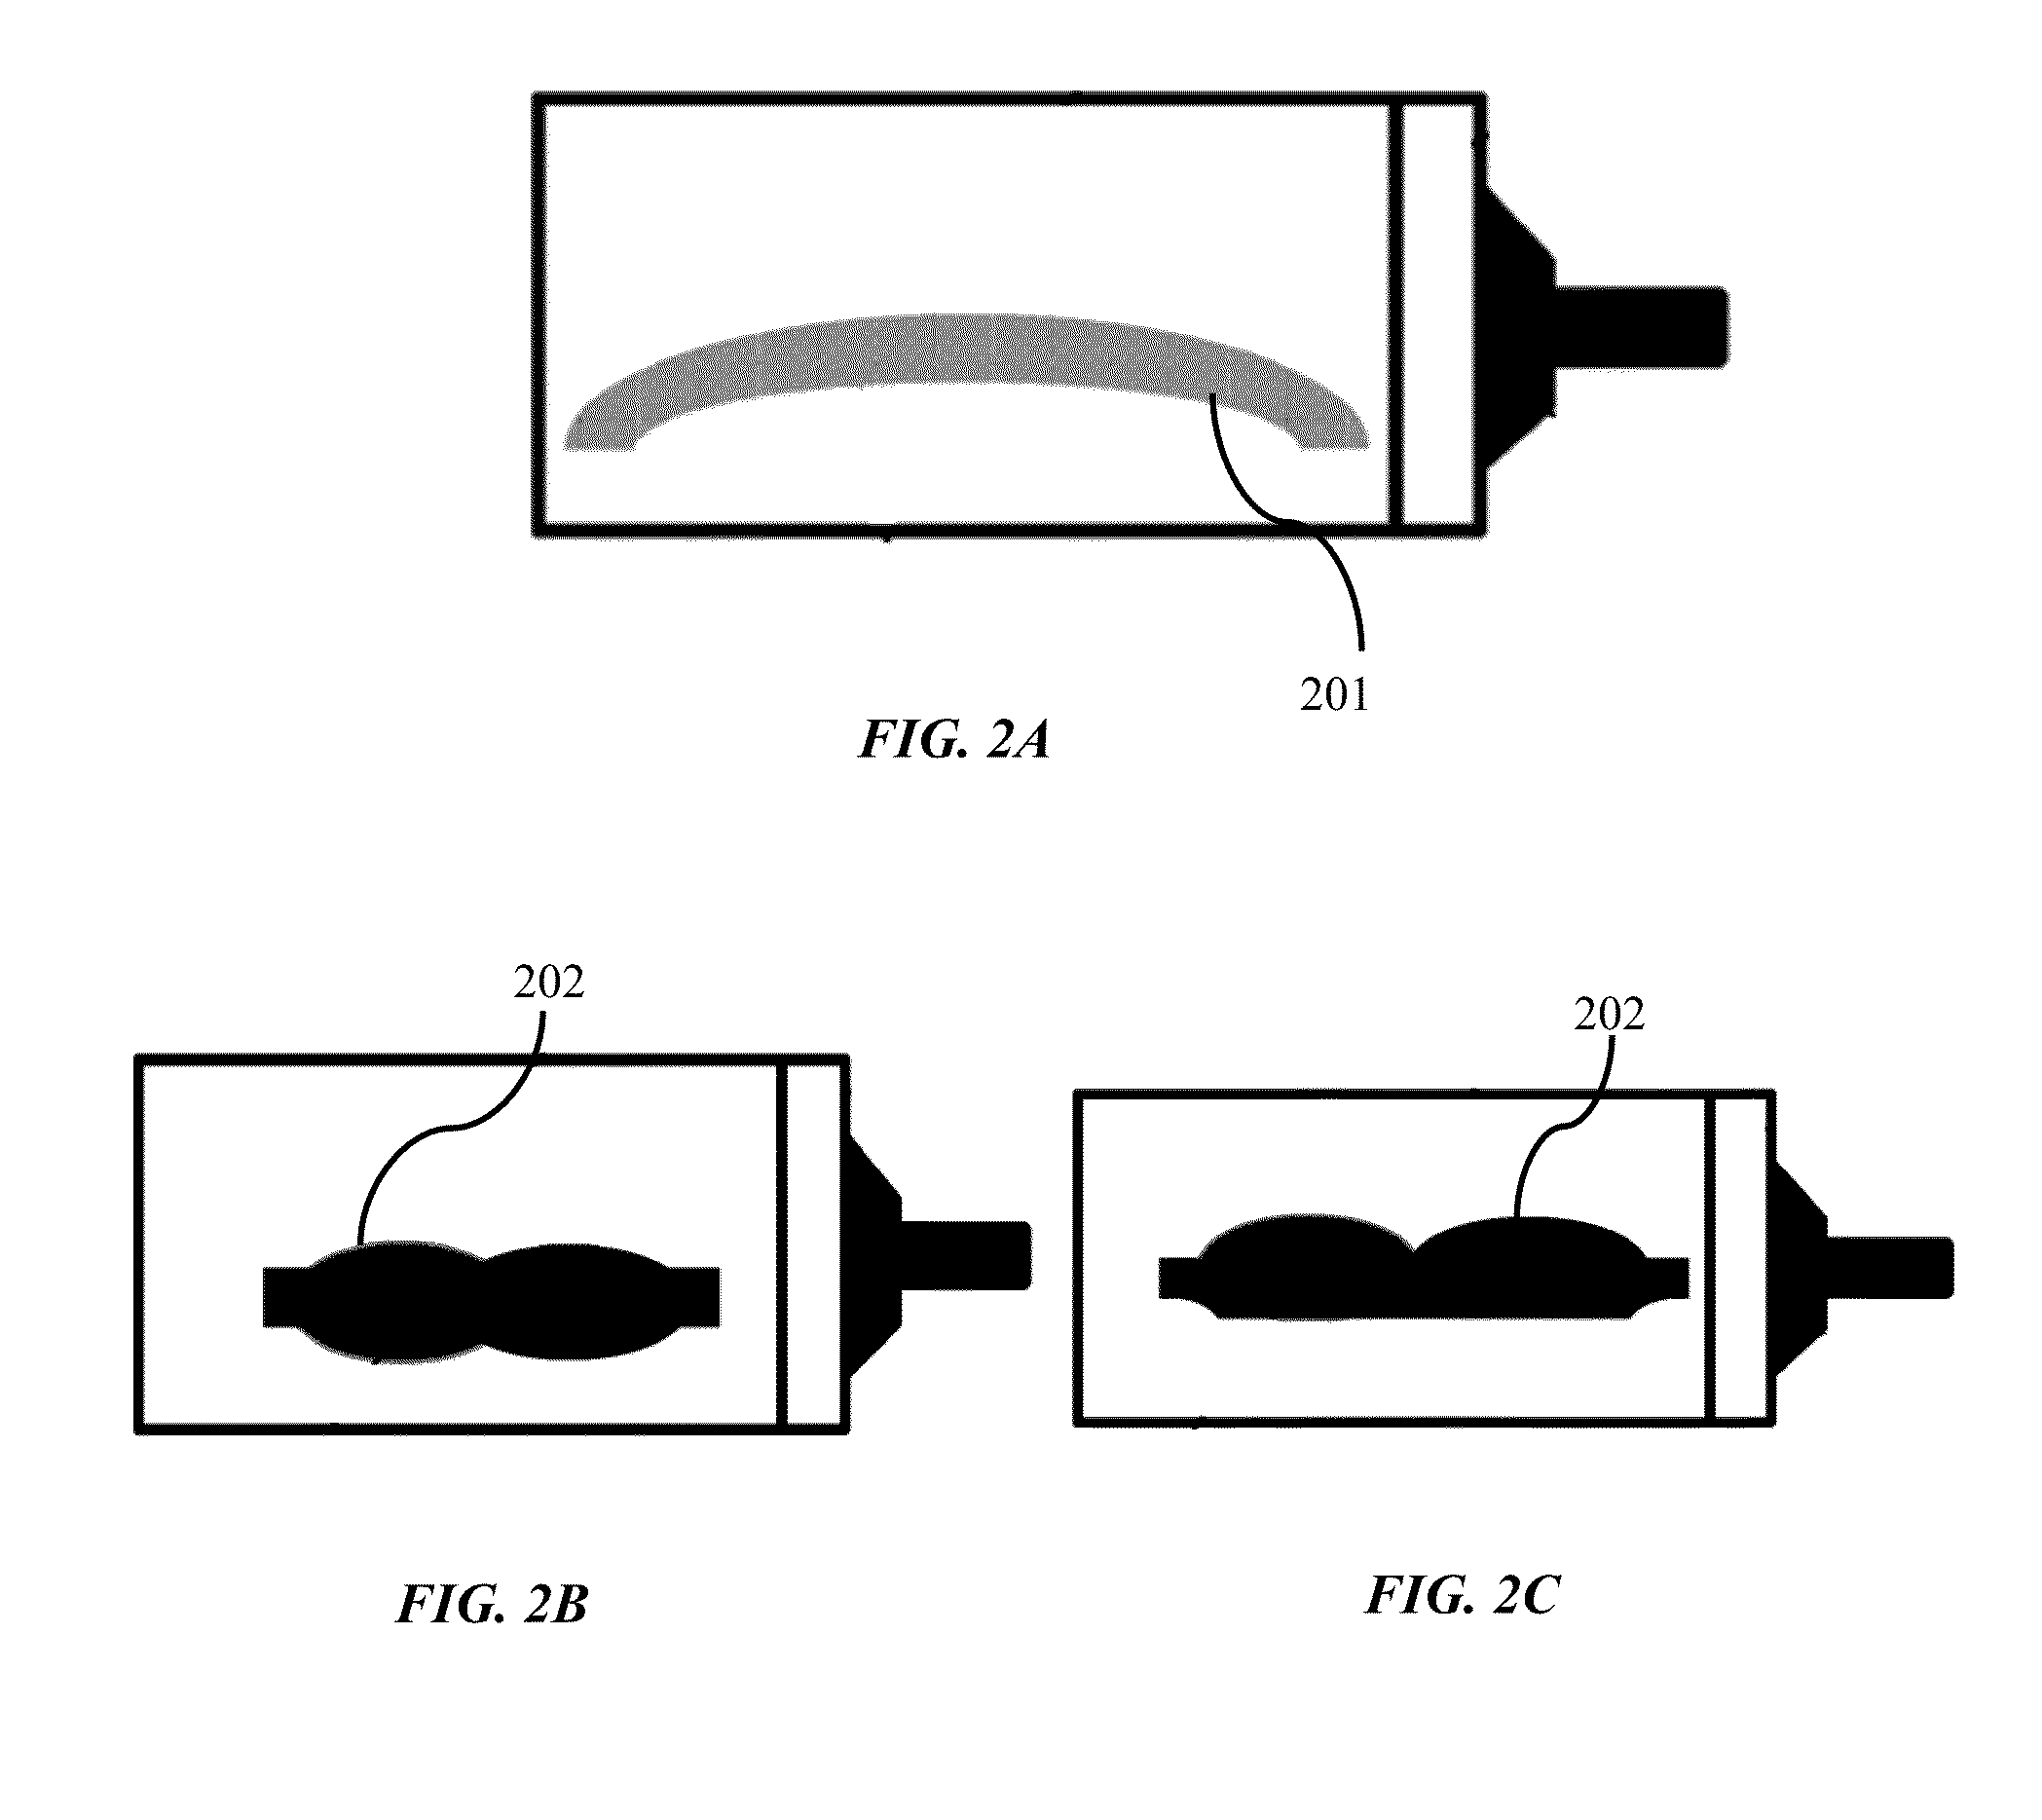 A milling blank and a method for fabricating dental bridgework using milling blank